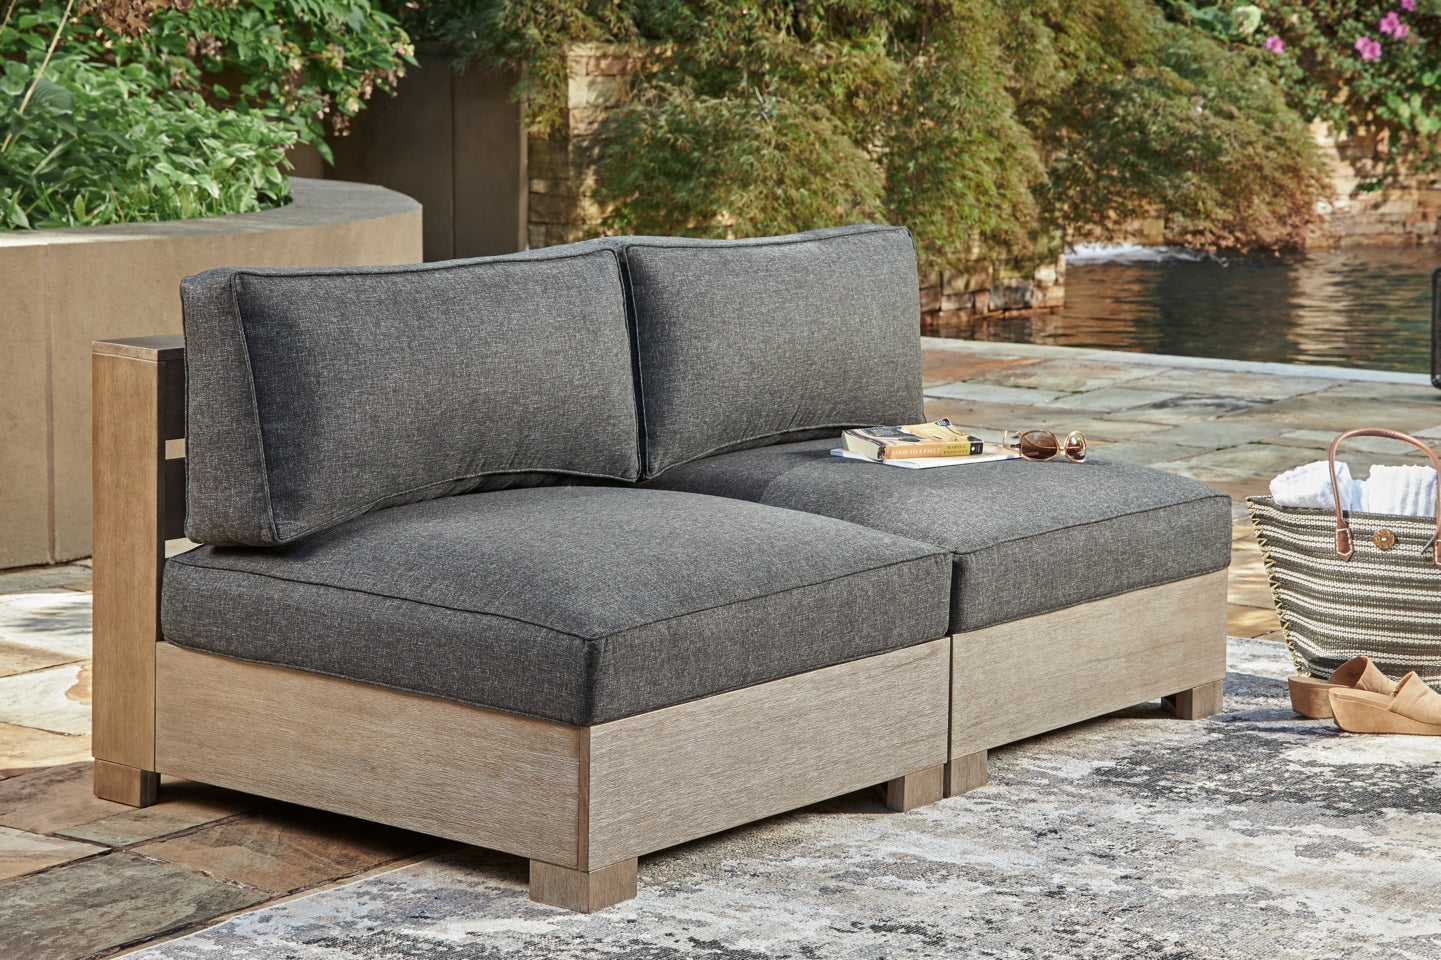 Citrine Park 5-Piece Outdoor Sectional with Ottoman - furniture place usa